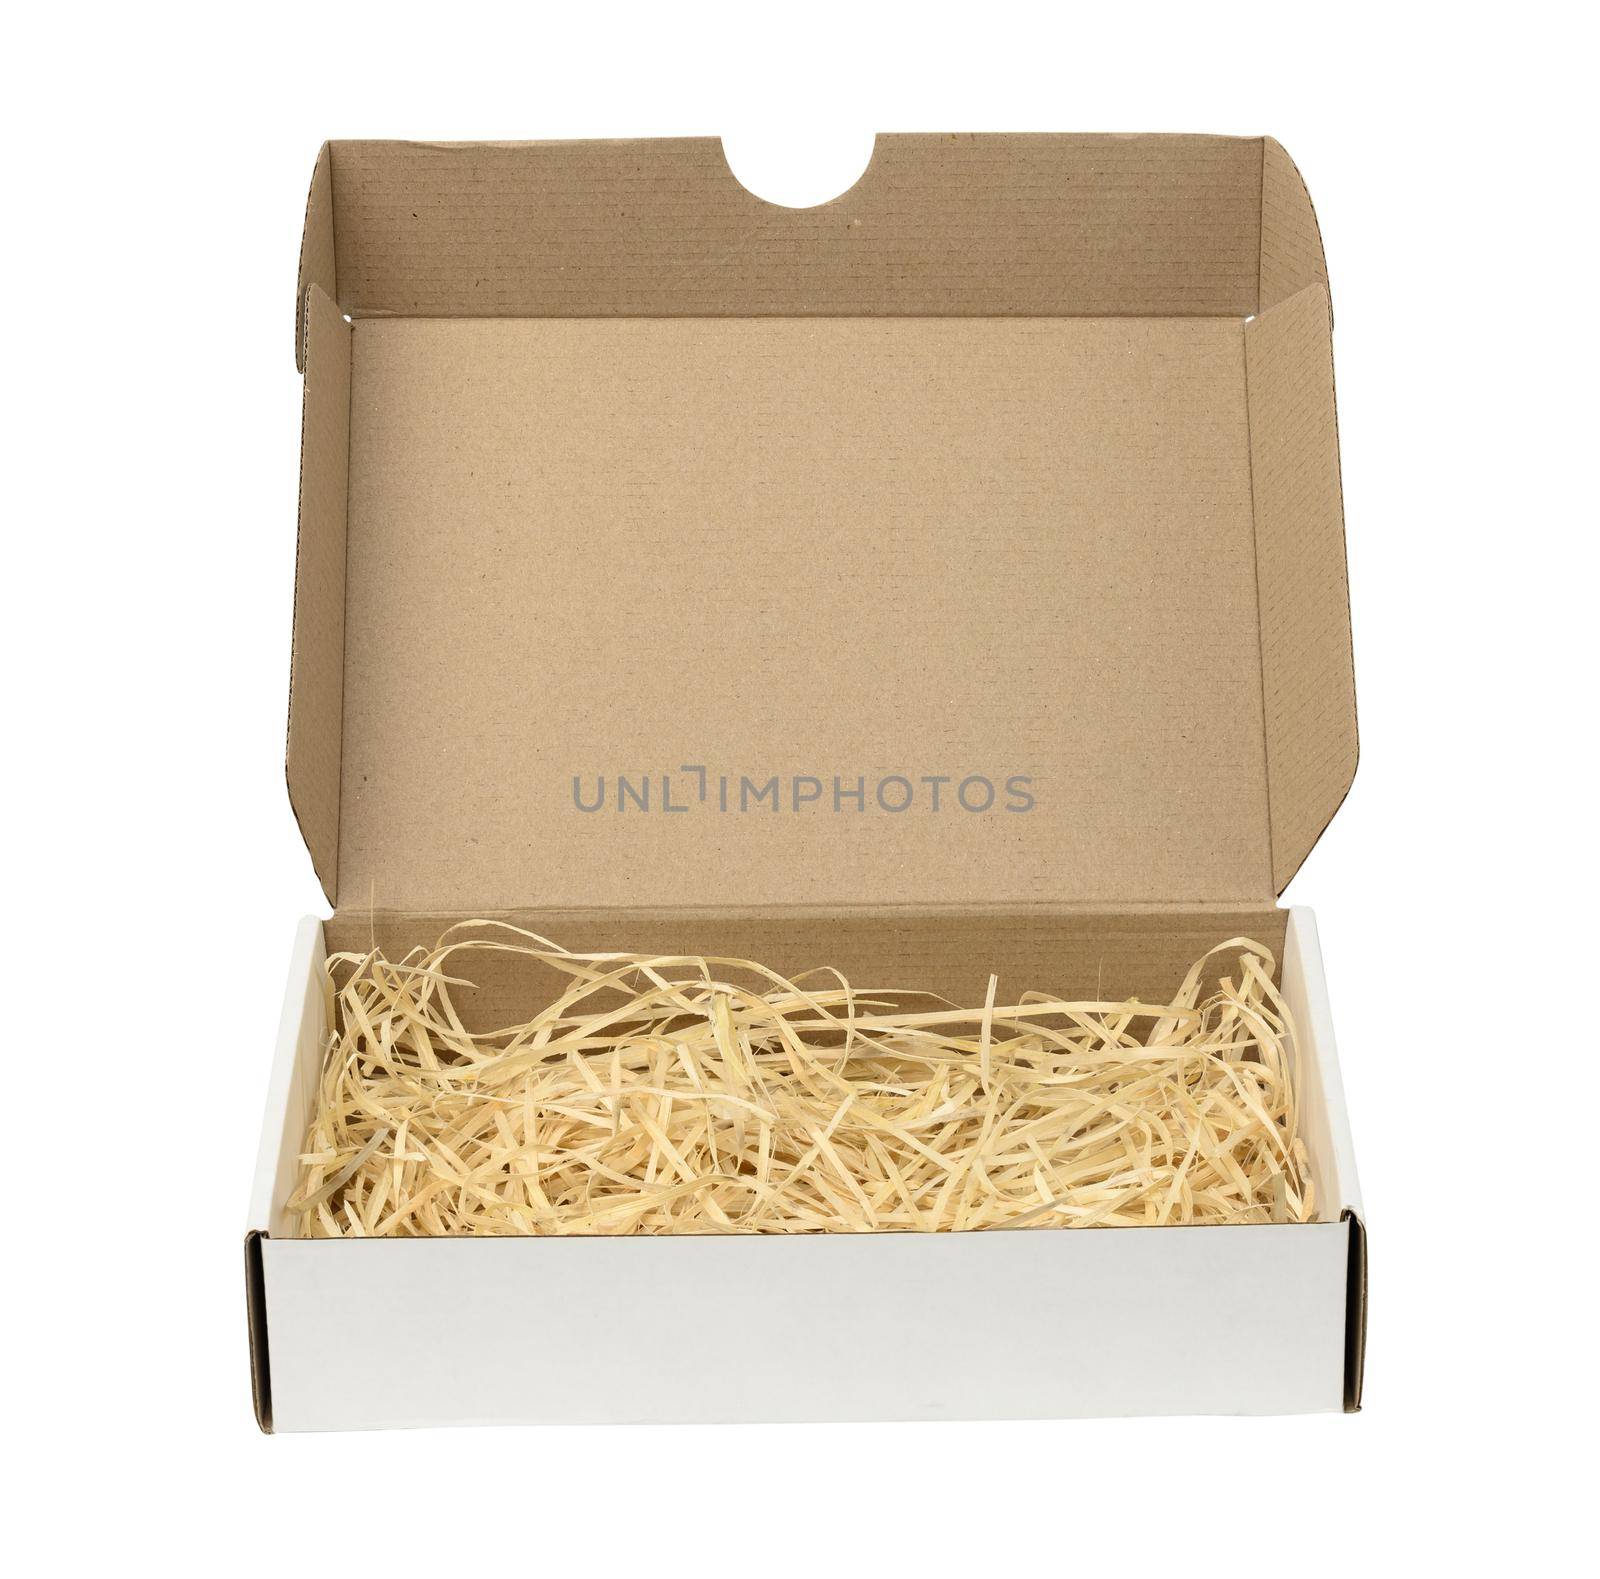 rectangular open corrugated paper box with sawdust inside. Packaging by ndanko